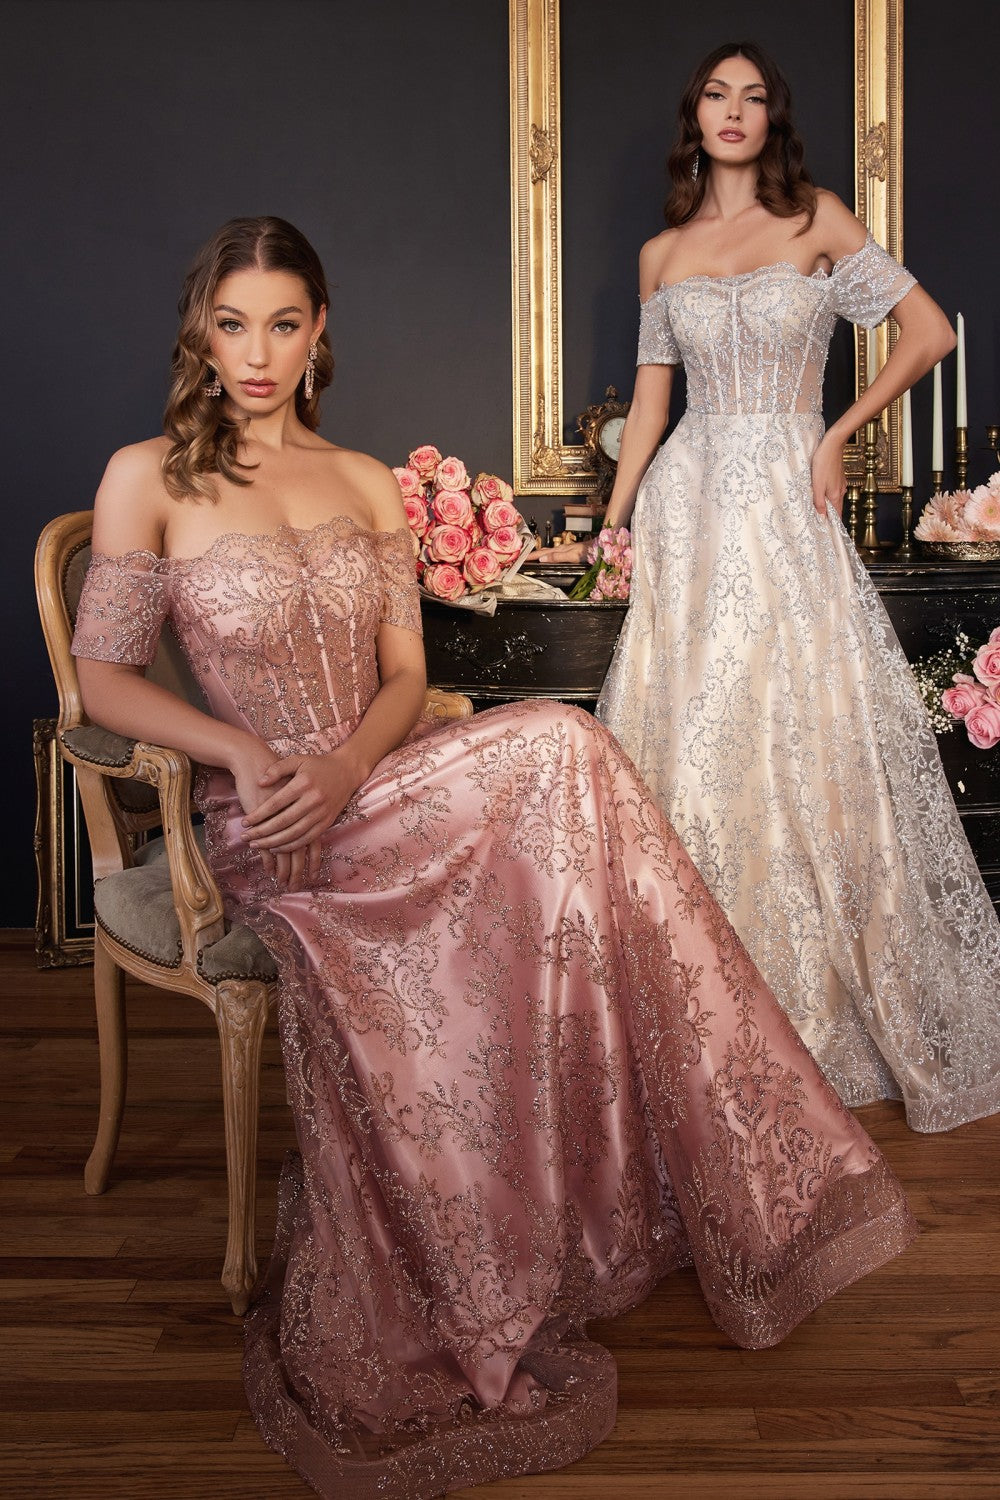 Off The Shoulder Sheer Sequin Bodice Appliqué glitter print a-line Prom & Bridesmaid gown Evening Gala Luxury Formal Dress CDJ835-0